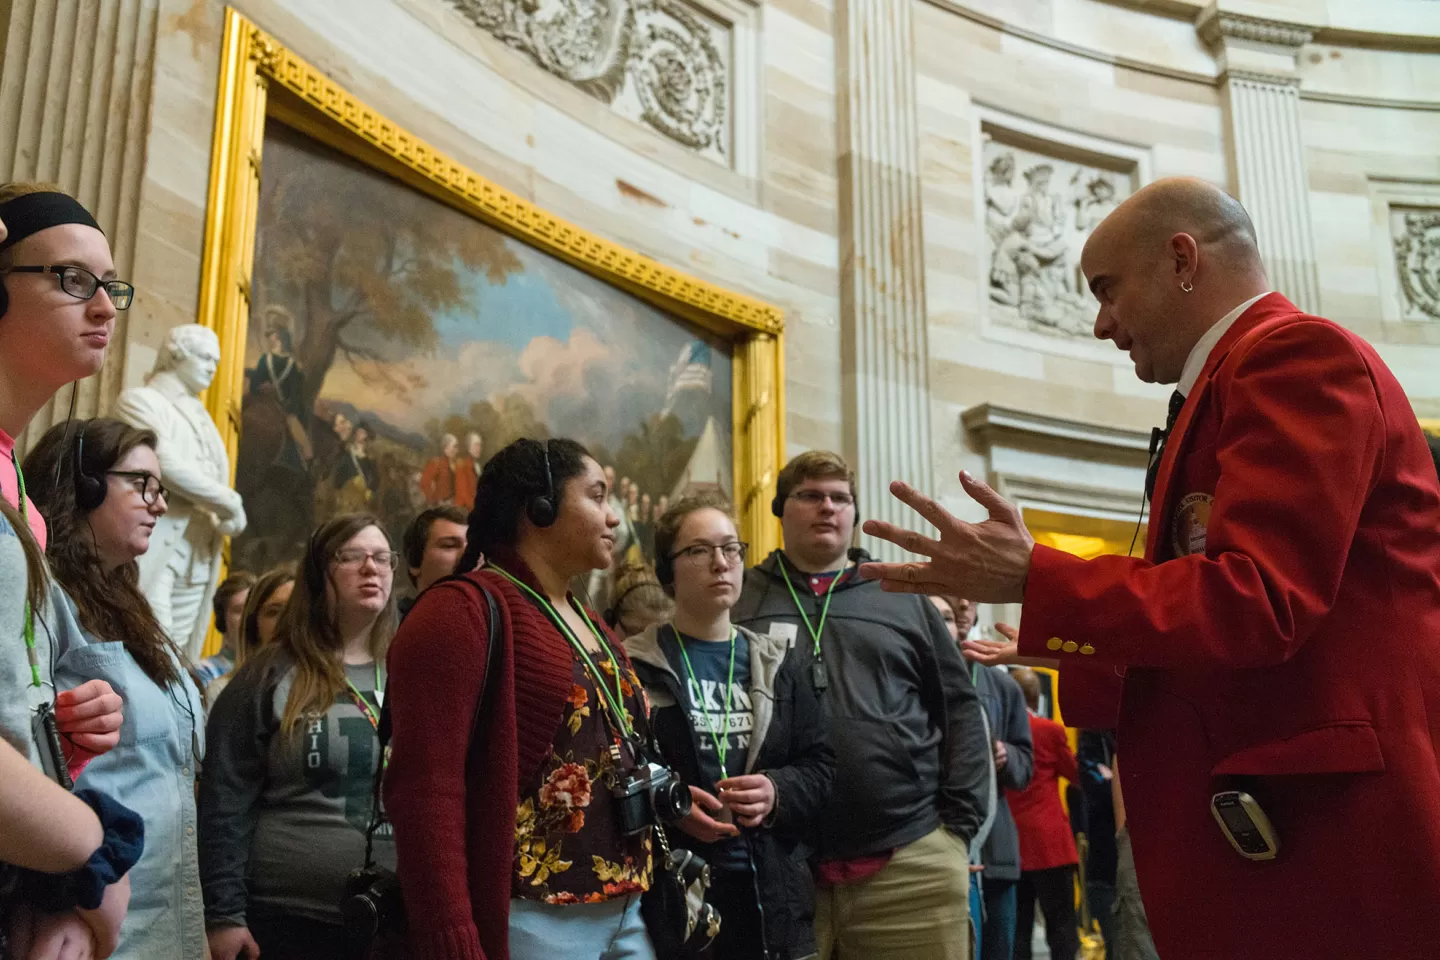 A tour with guide in the U.S. Capitol Rotunda.